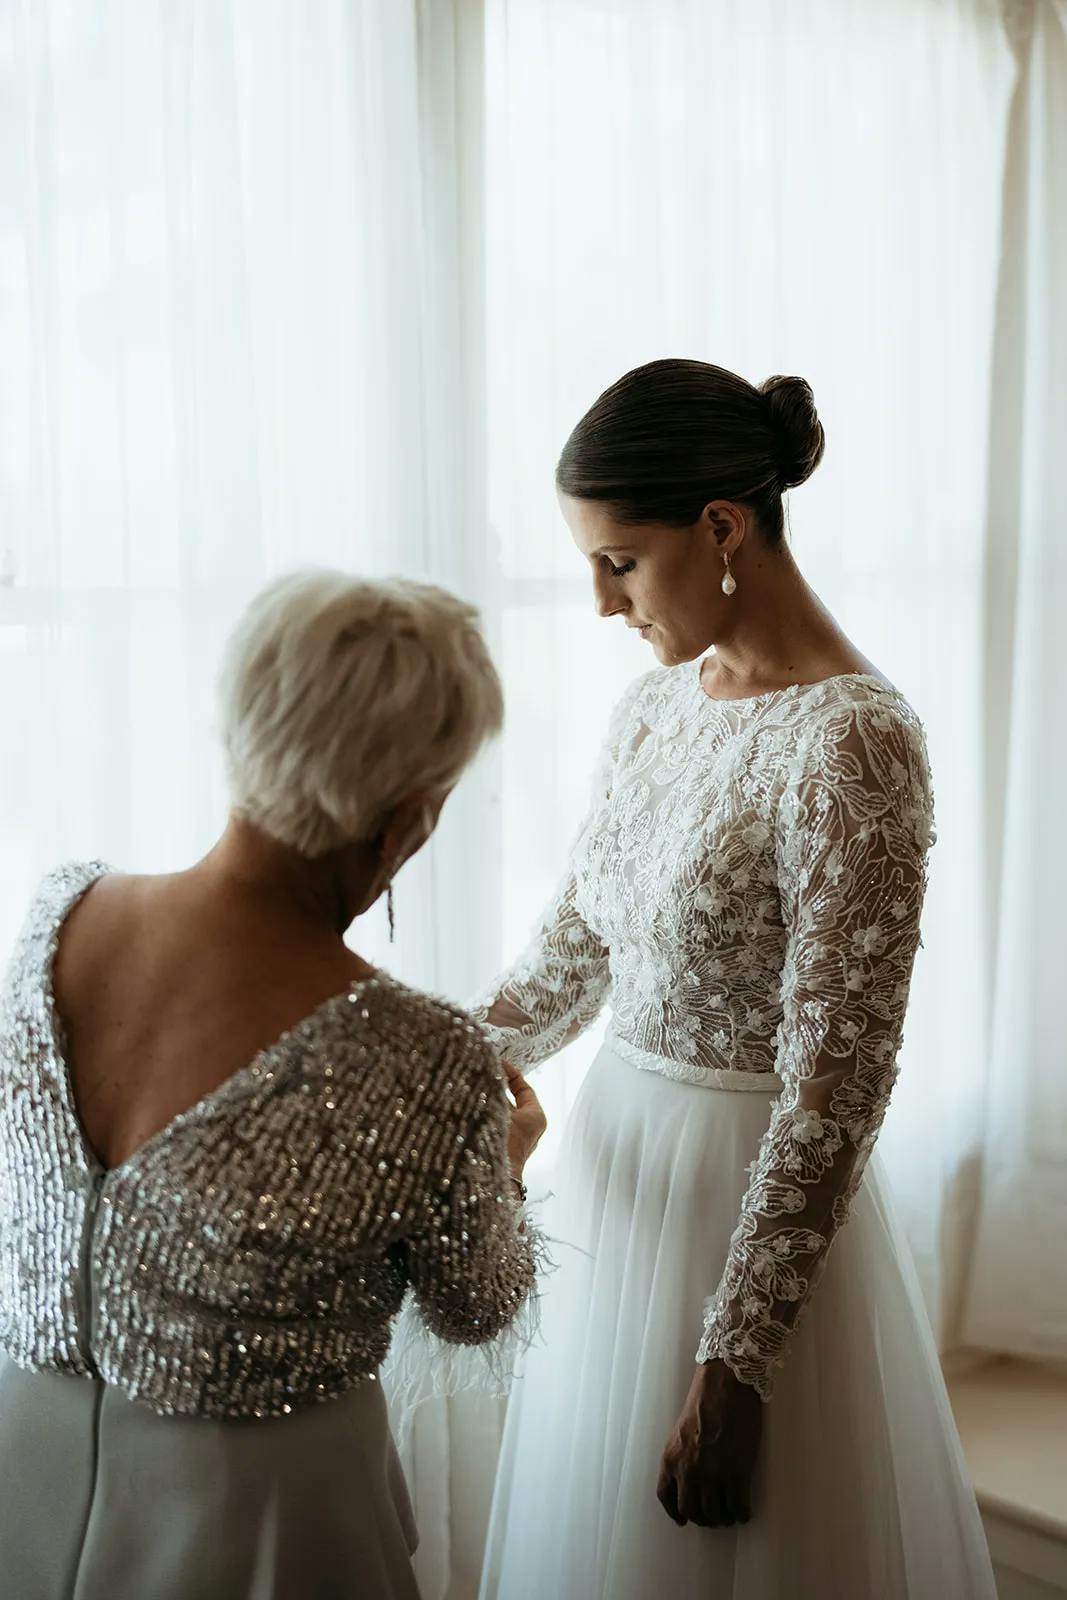 Bride and mother of the bride getting ready